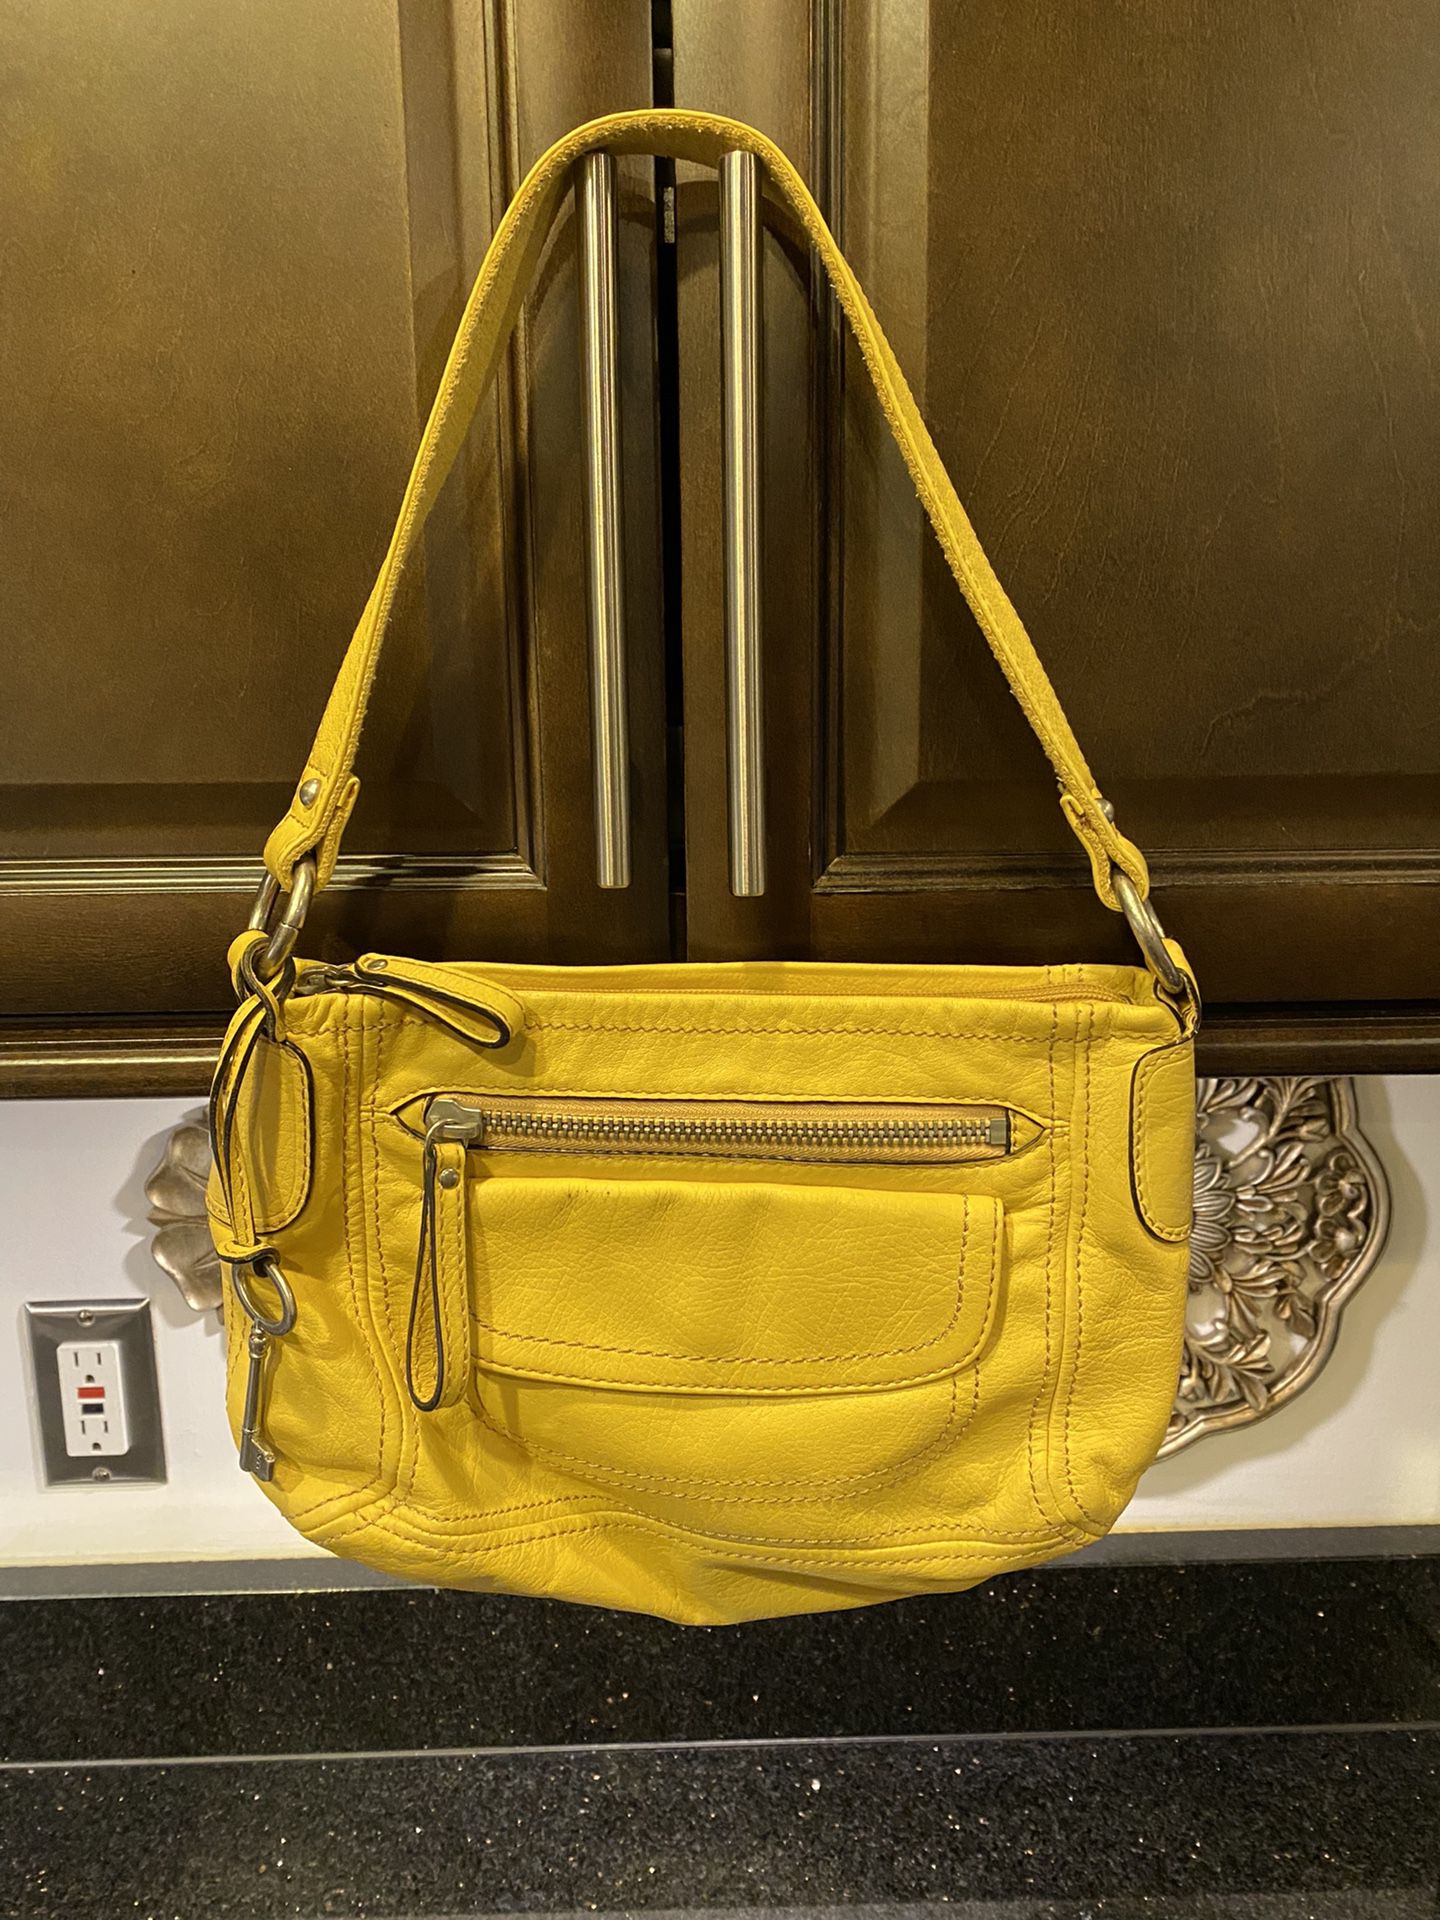 Fossil Yellow Leather Hanover Top Zip Purse Shoulder Bag